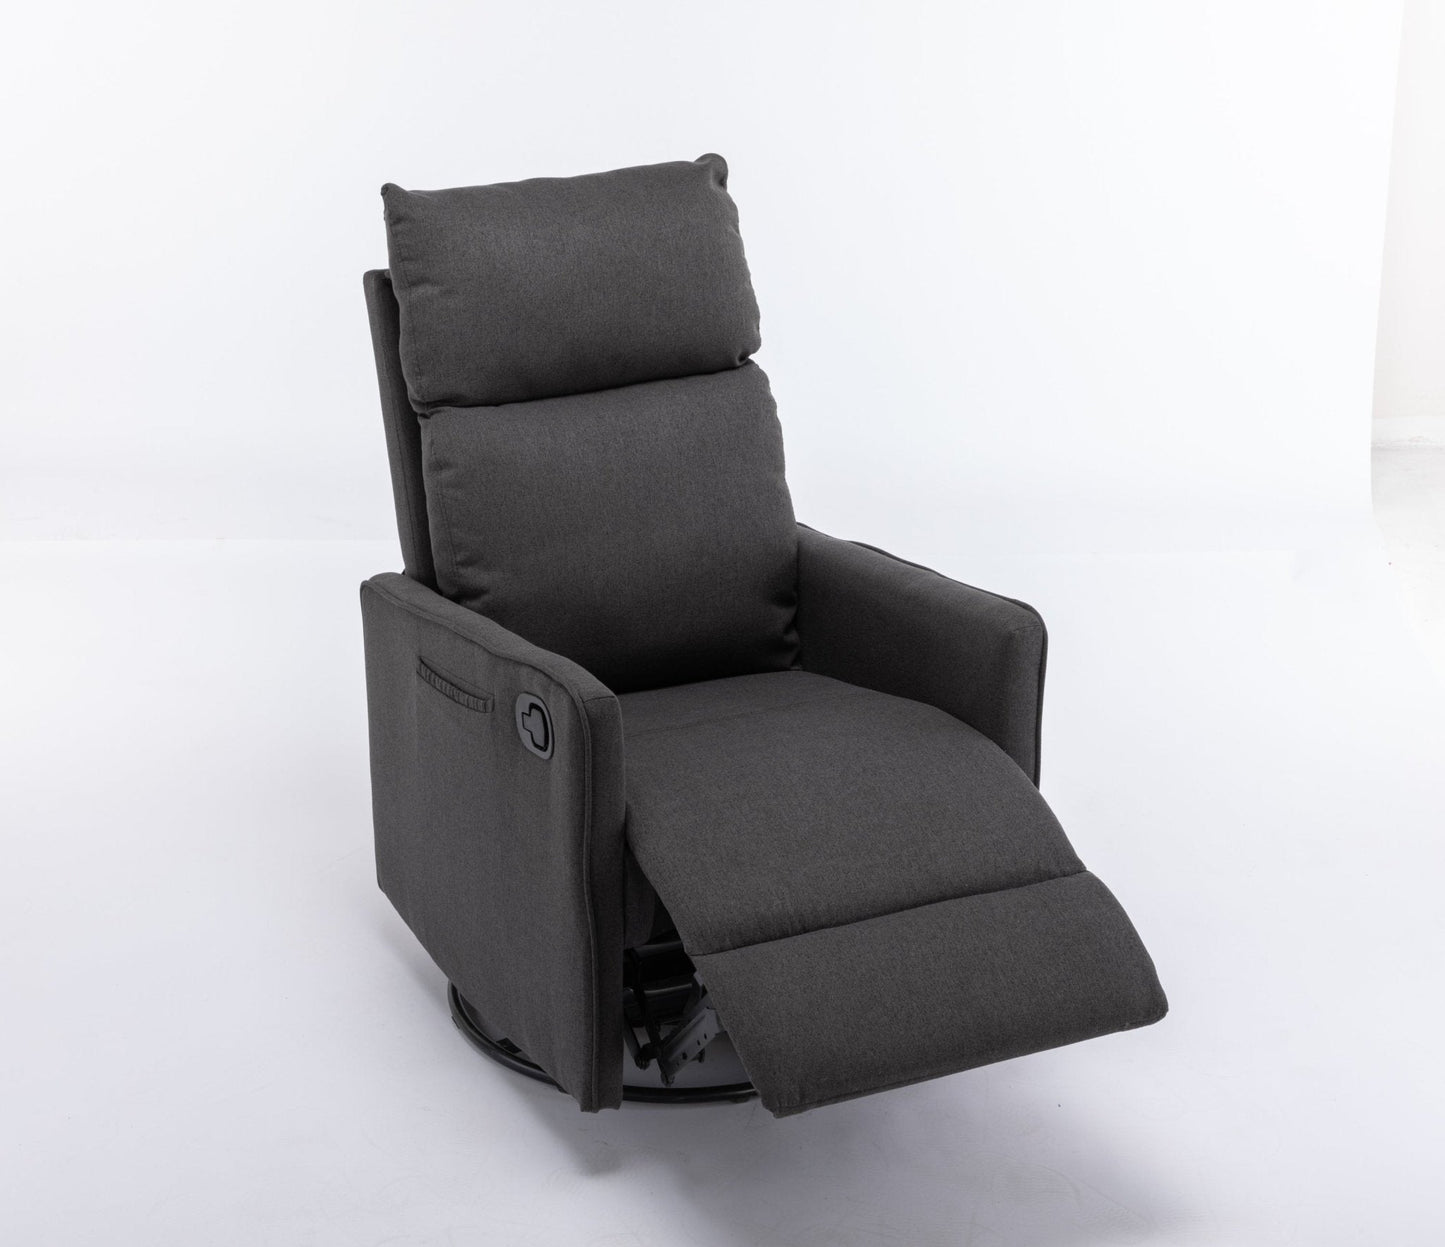 038-Cotton Linen Fabric Swivel Rocking Chair Glider Rocker Recliner Nursery Chair With Adjustable Back And Footrest For Living Room Indoor,Dark Gray